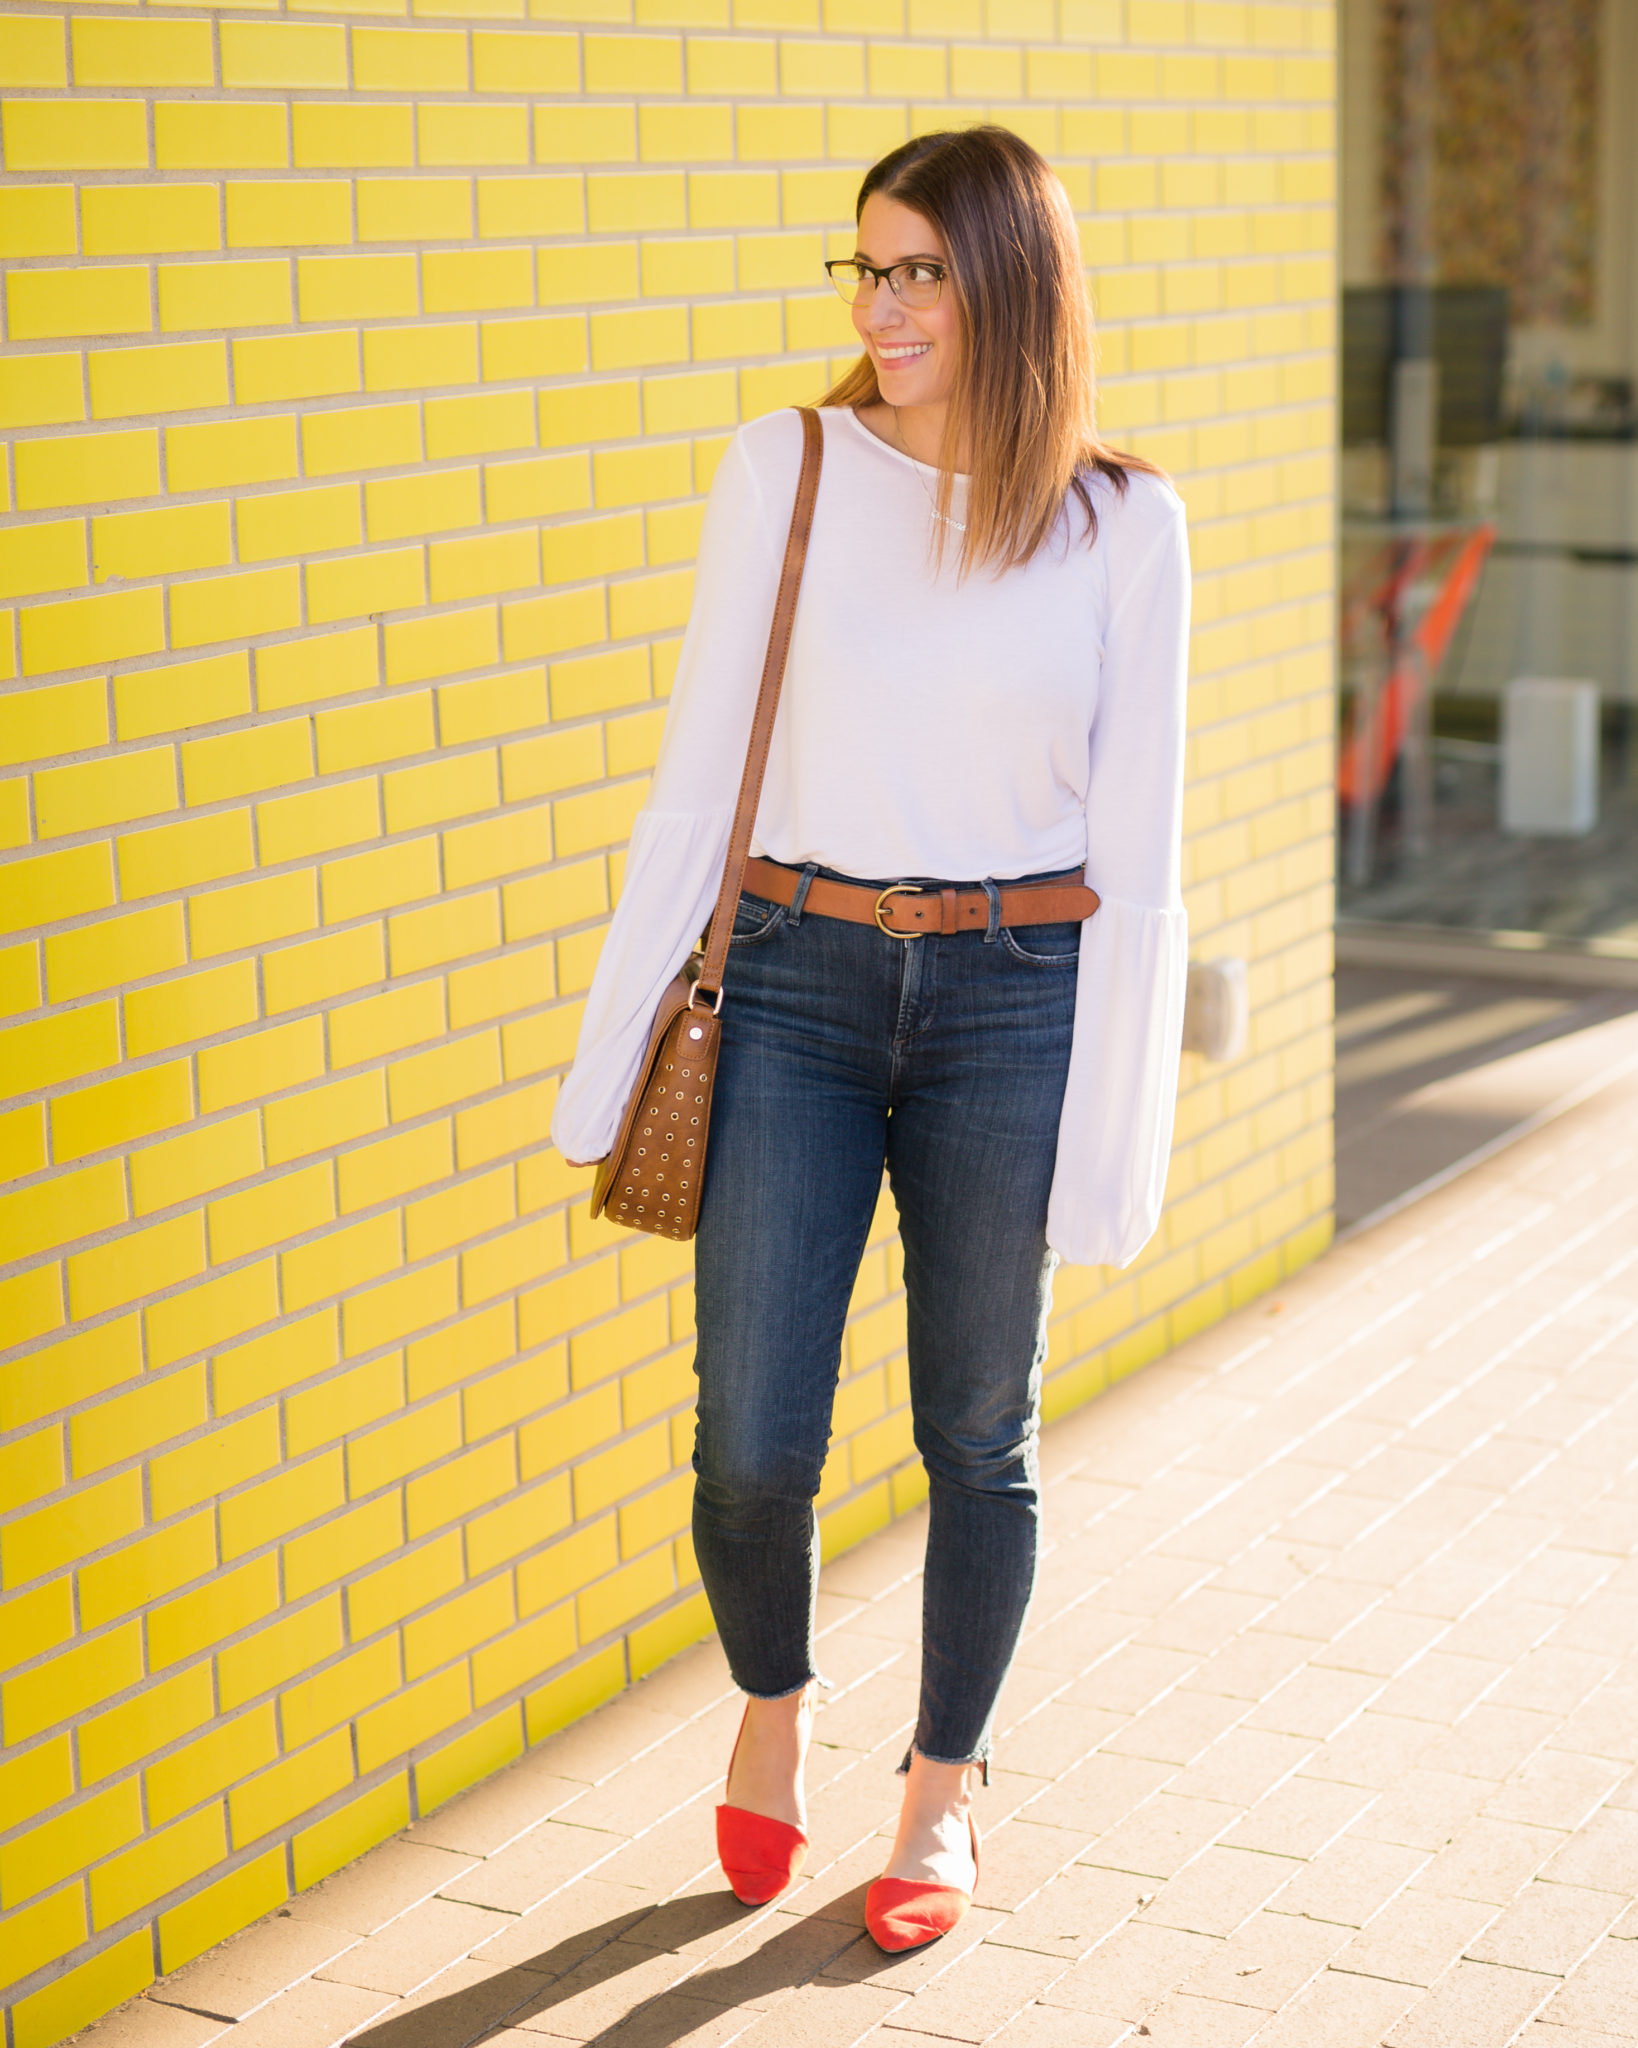 how to style a white tee and jeans | and upgrade on the white tee | my fall capsule wardrobe on allweareblog.com